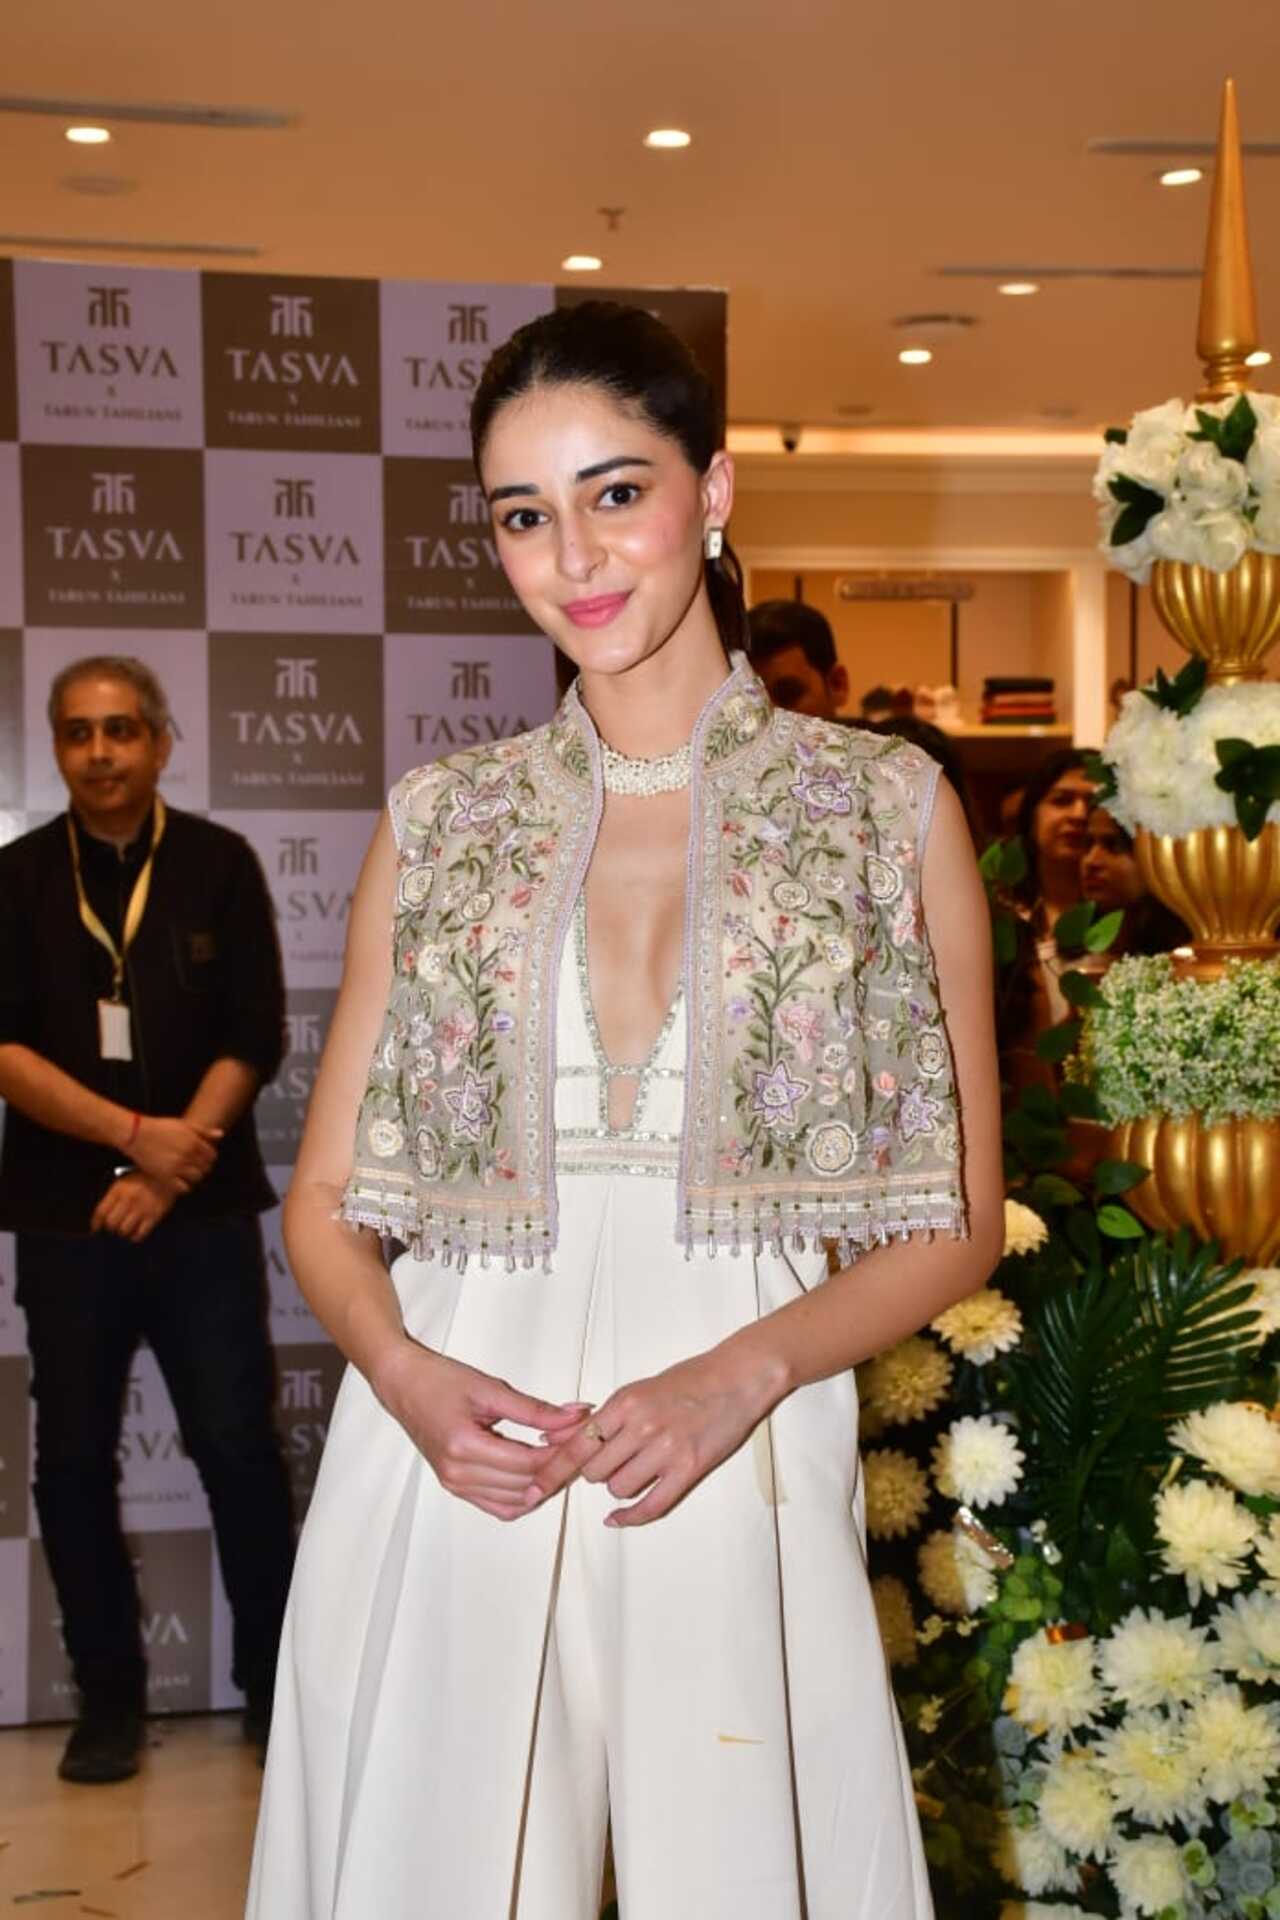 Amid reports of her breakup with Aditya Roy Kapur, actress Ananya Panday was spotted at the Tasva red carpet event in a stunning ethnic ensemble. 